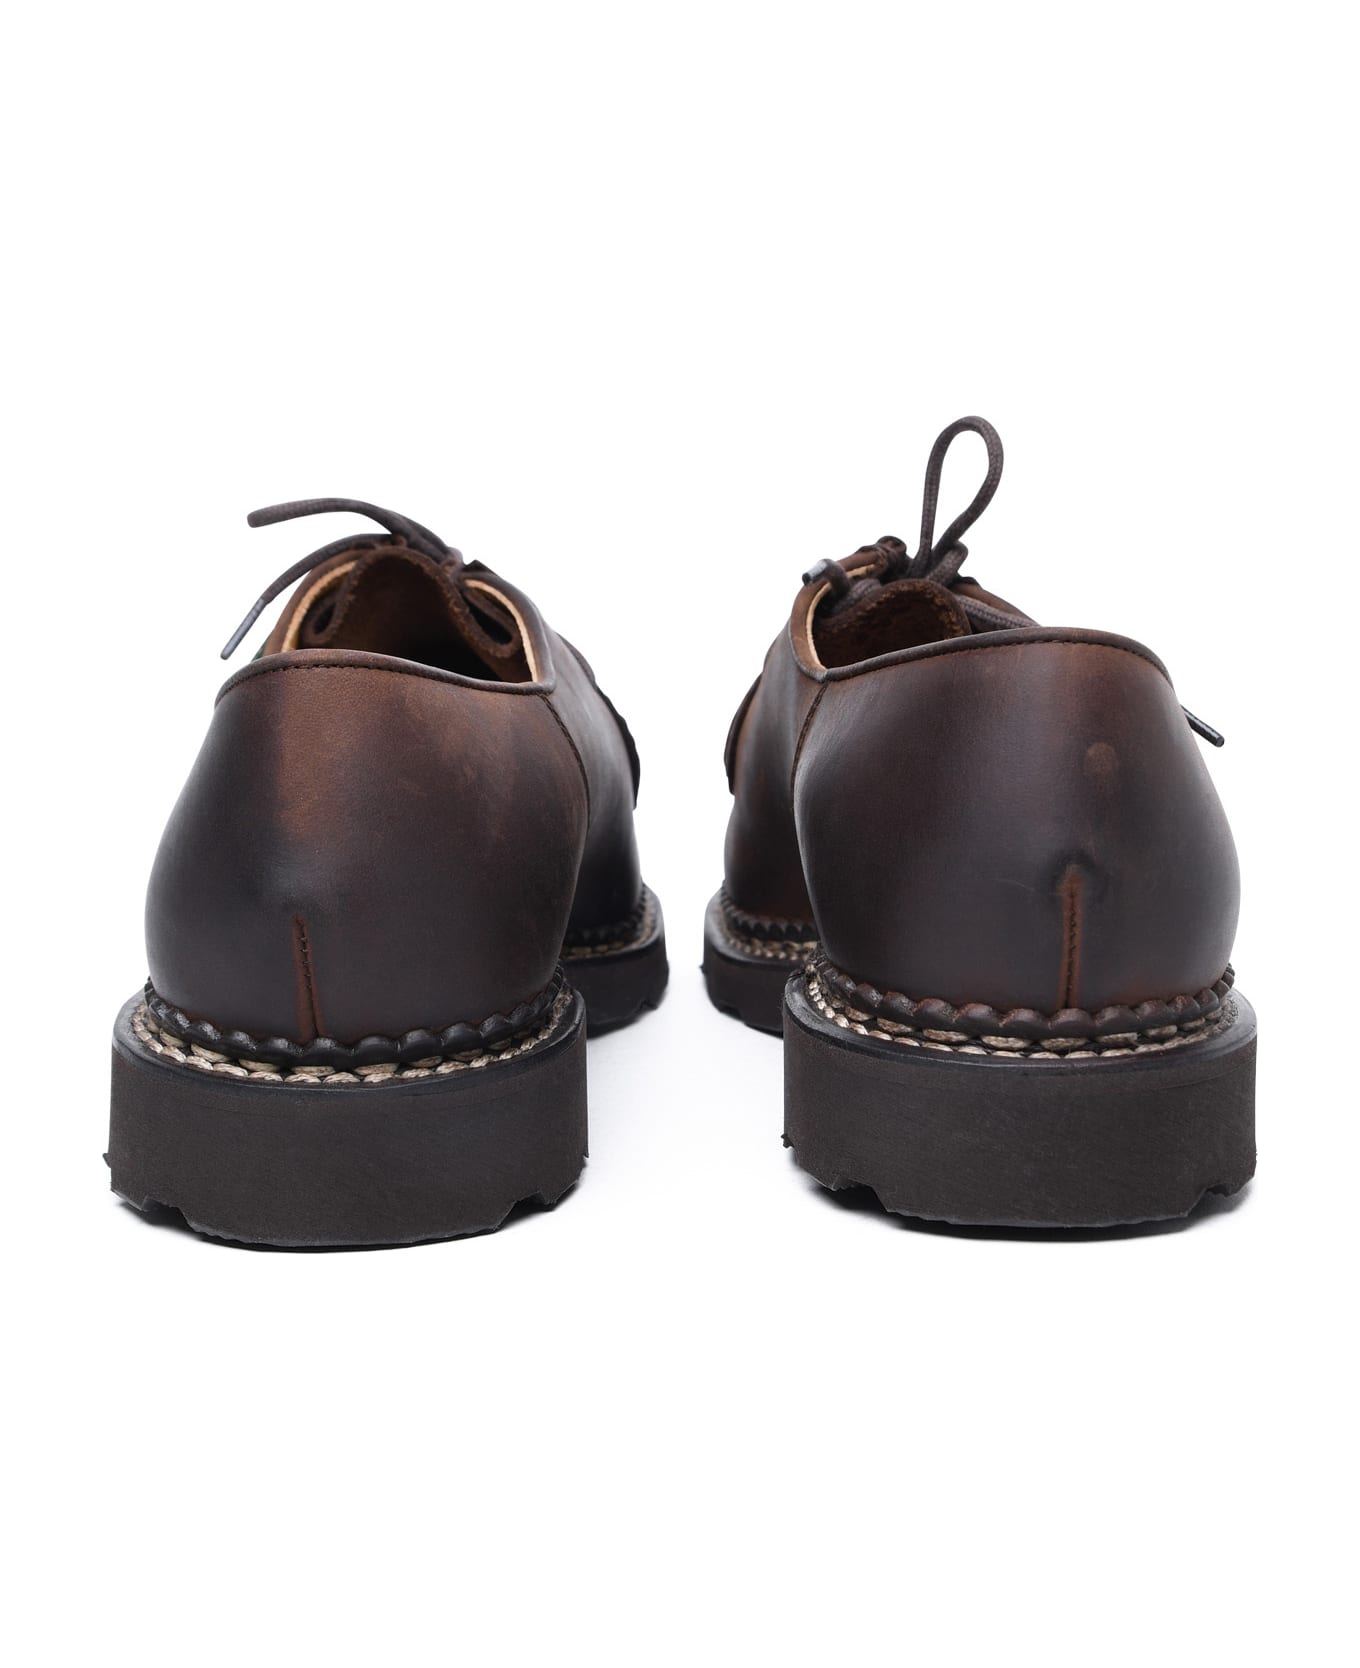 Paraboot 'michael' Brown Leather Derby Shoes - Brown ローファー＆デッキシューズ